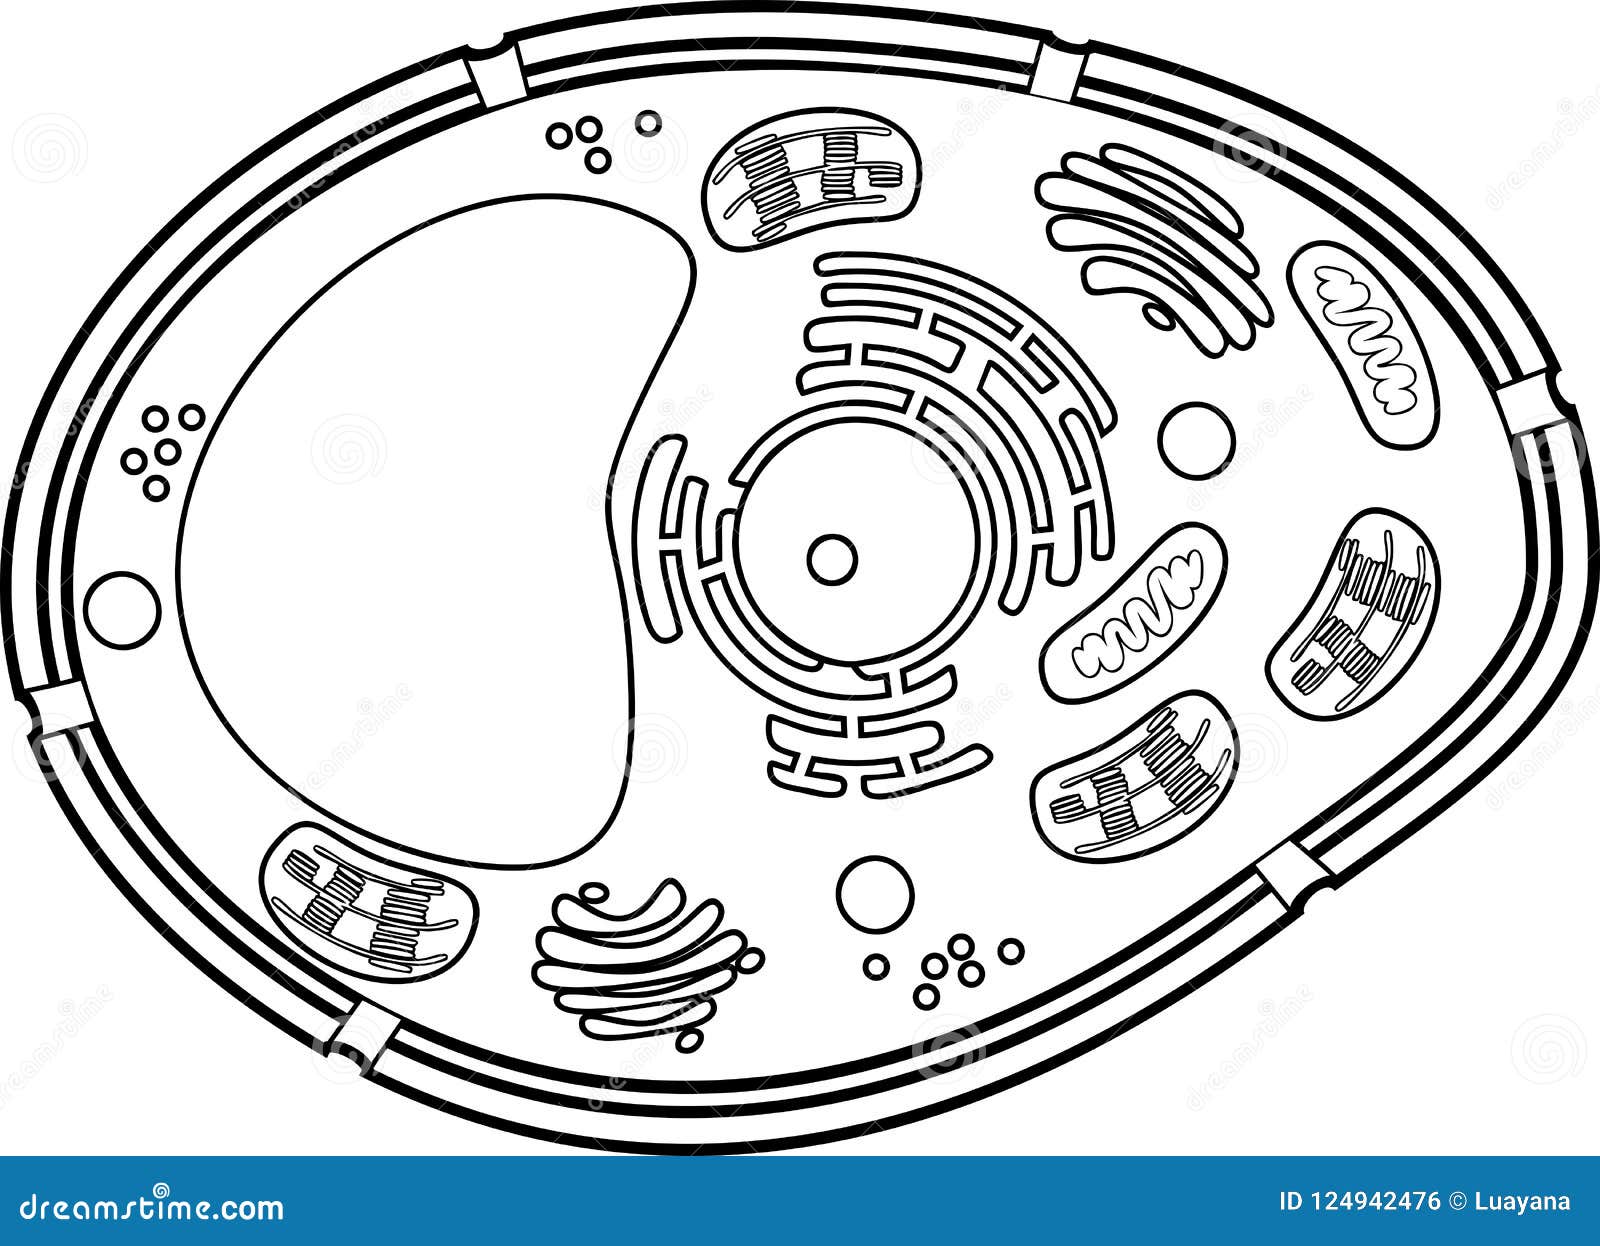 Download Coloring Page. Plant Cell Structure Stock Vector ...